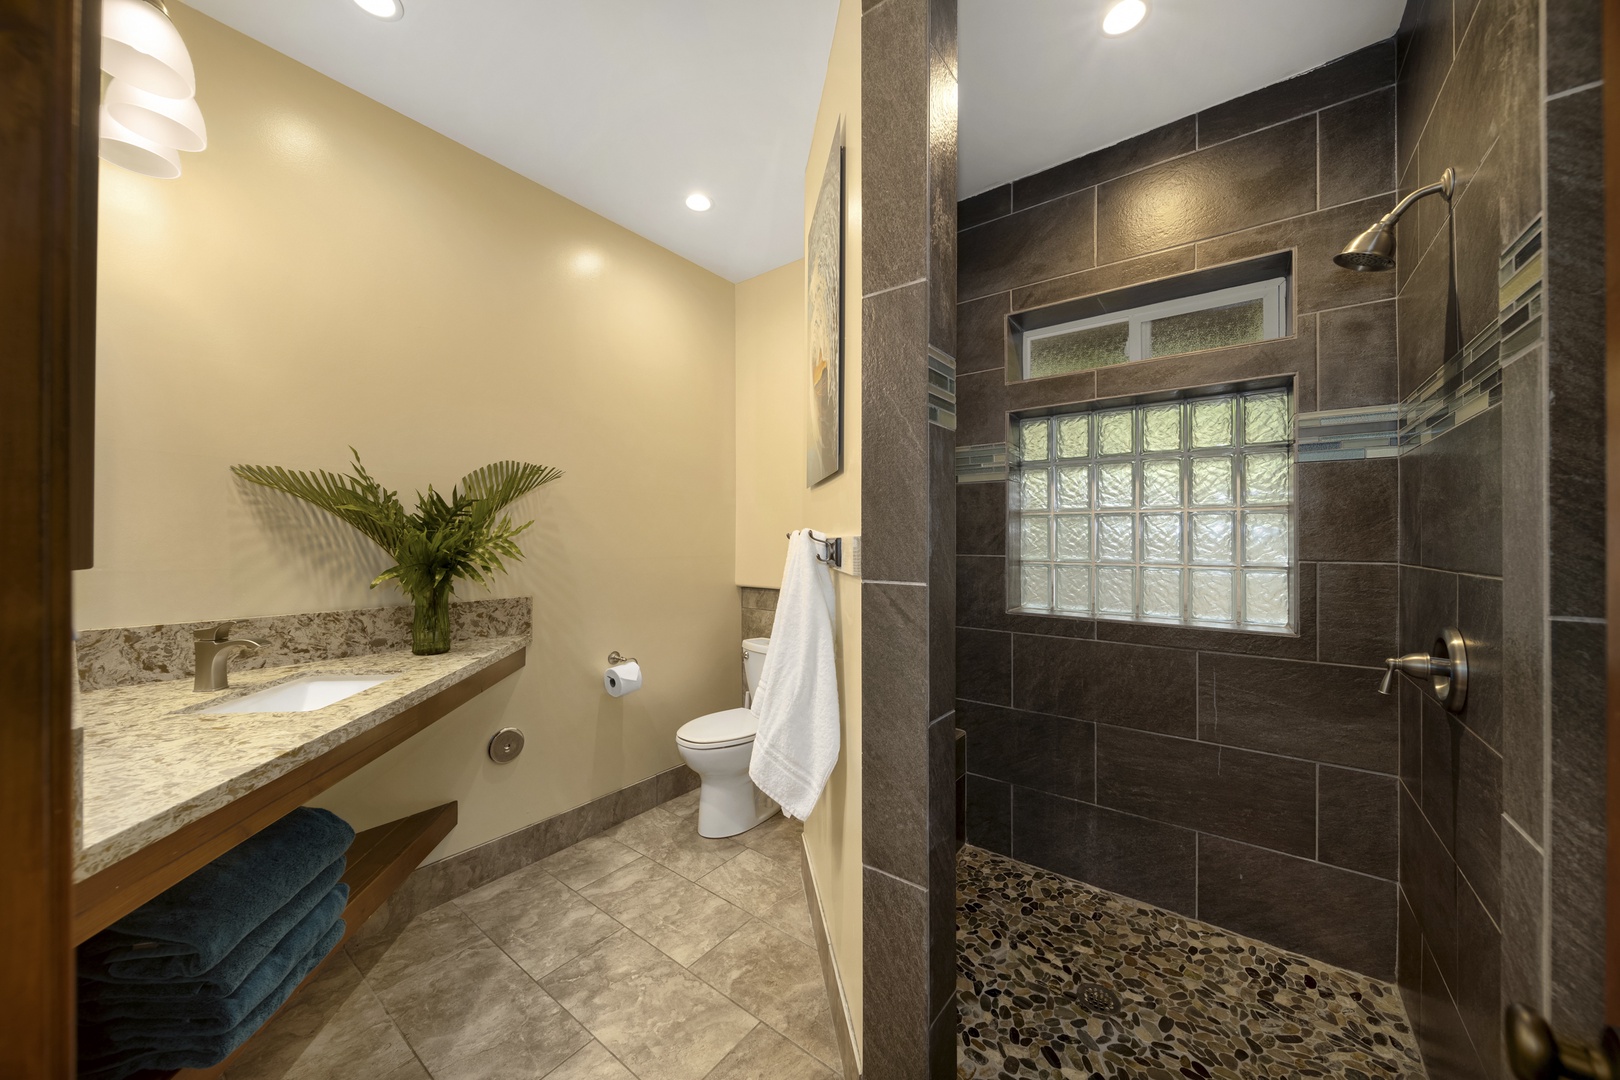 Haleiwa Vacation Rentals, Waimea Dream - The downstairs bathroom has another walk-in shower.